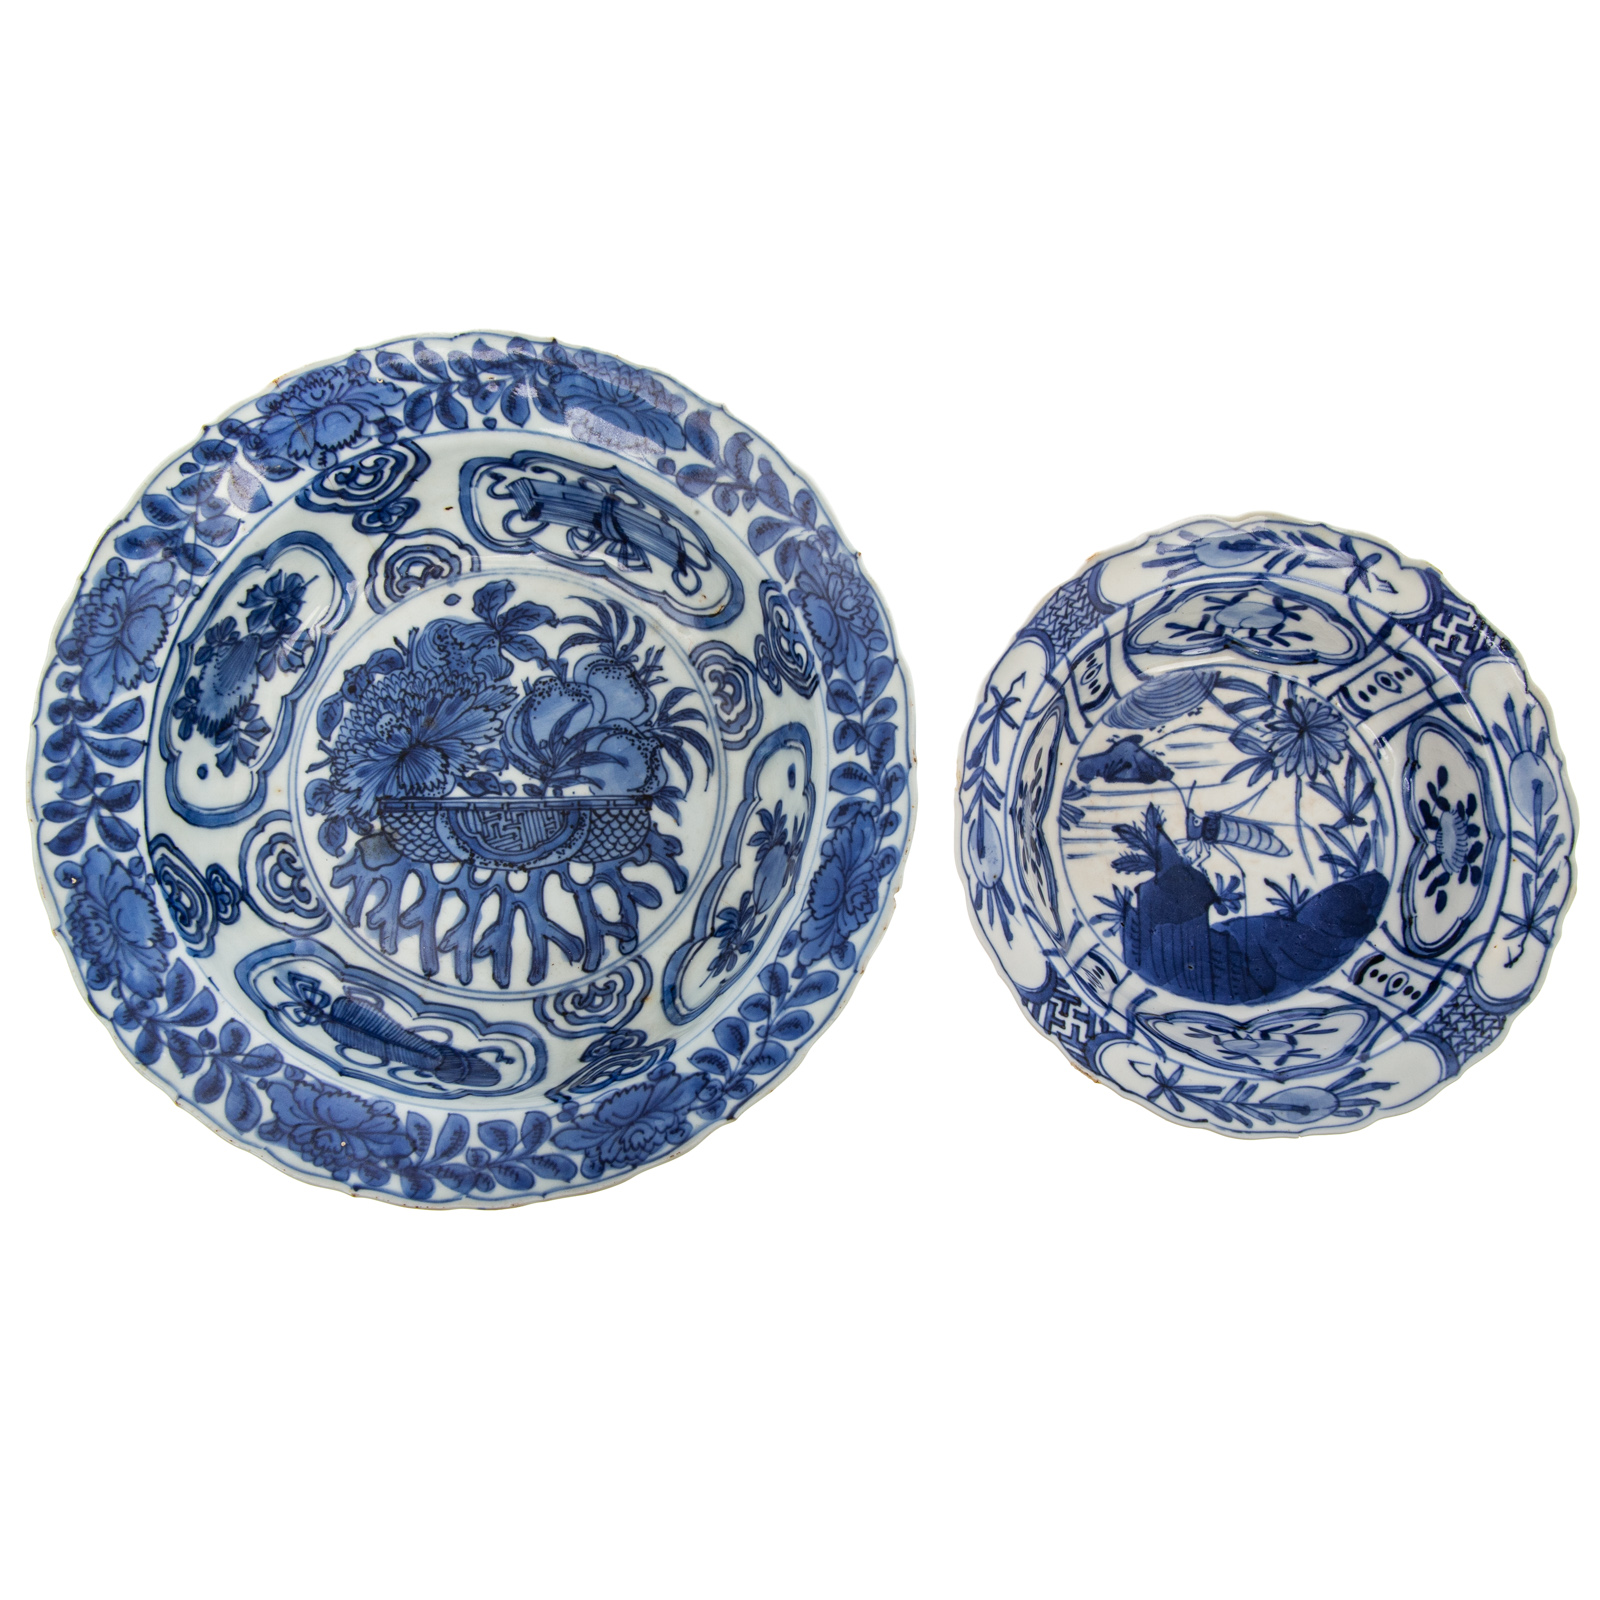 TWO CHINESE EXPORT KRAAK BOWLS 36a63e